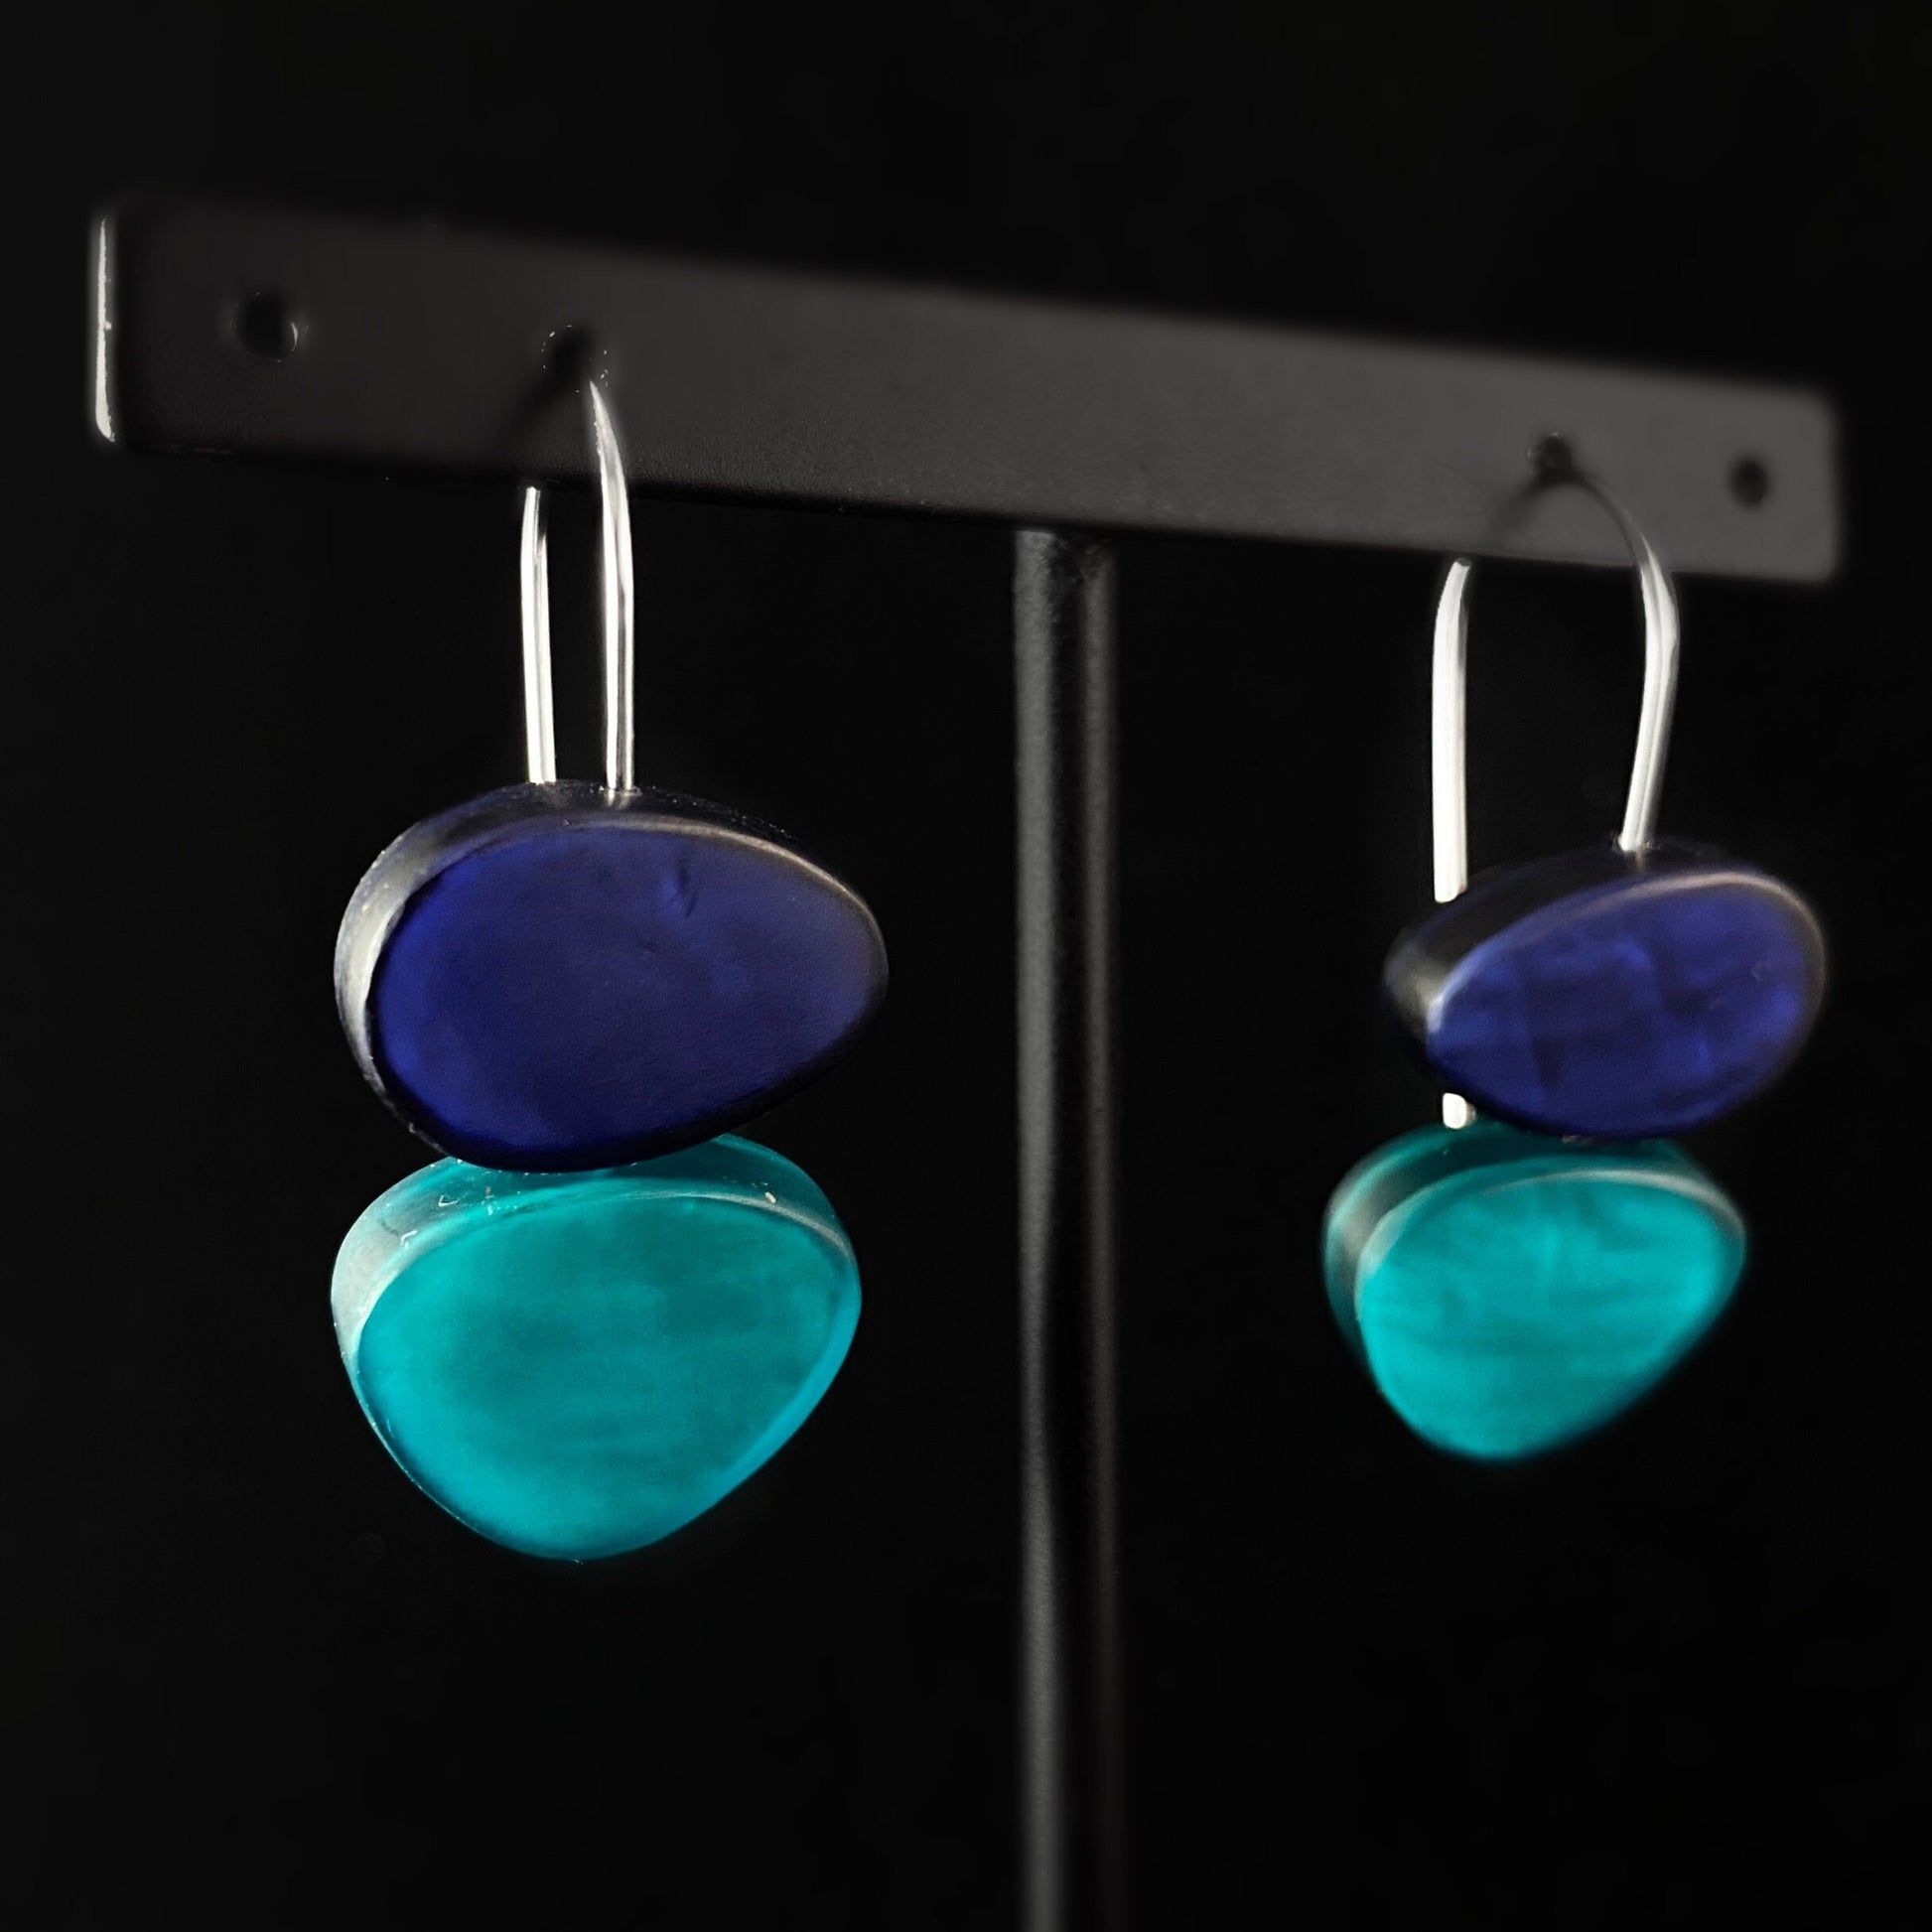 Handmade Resin and Shell Two Tone Turquoise/Sapphire Blue Stacked Earrings, Hypoallergenic - Origin